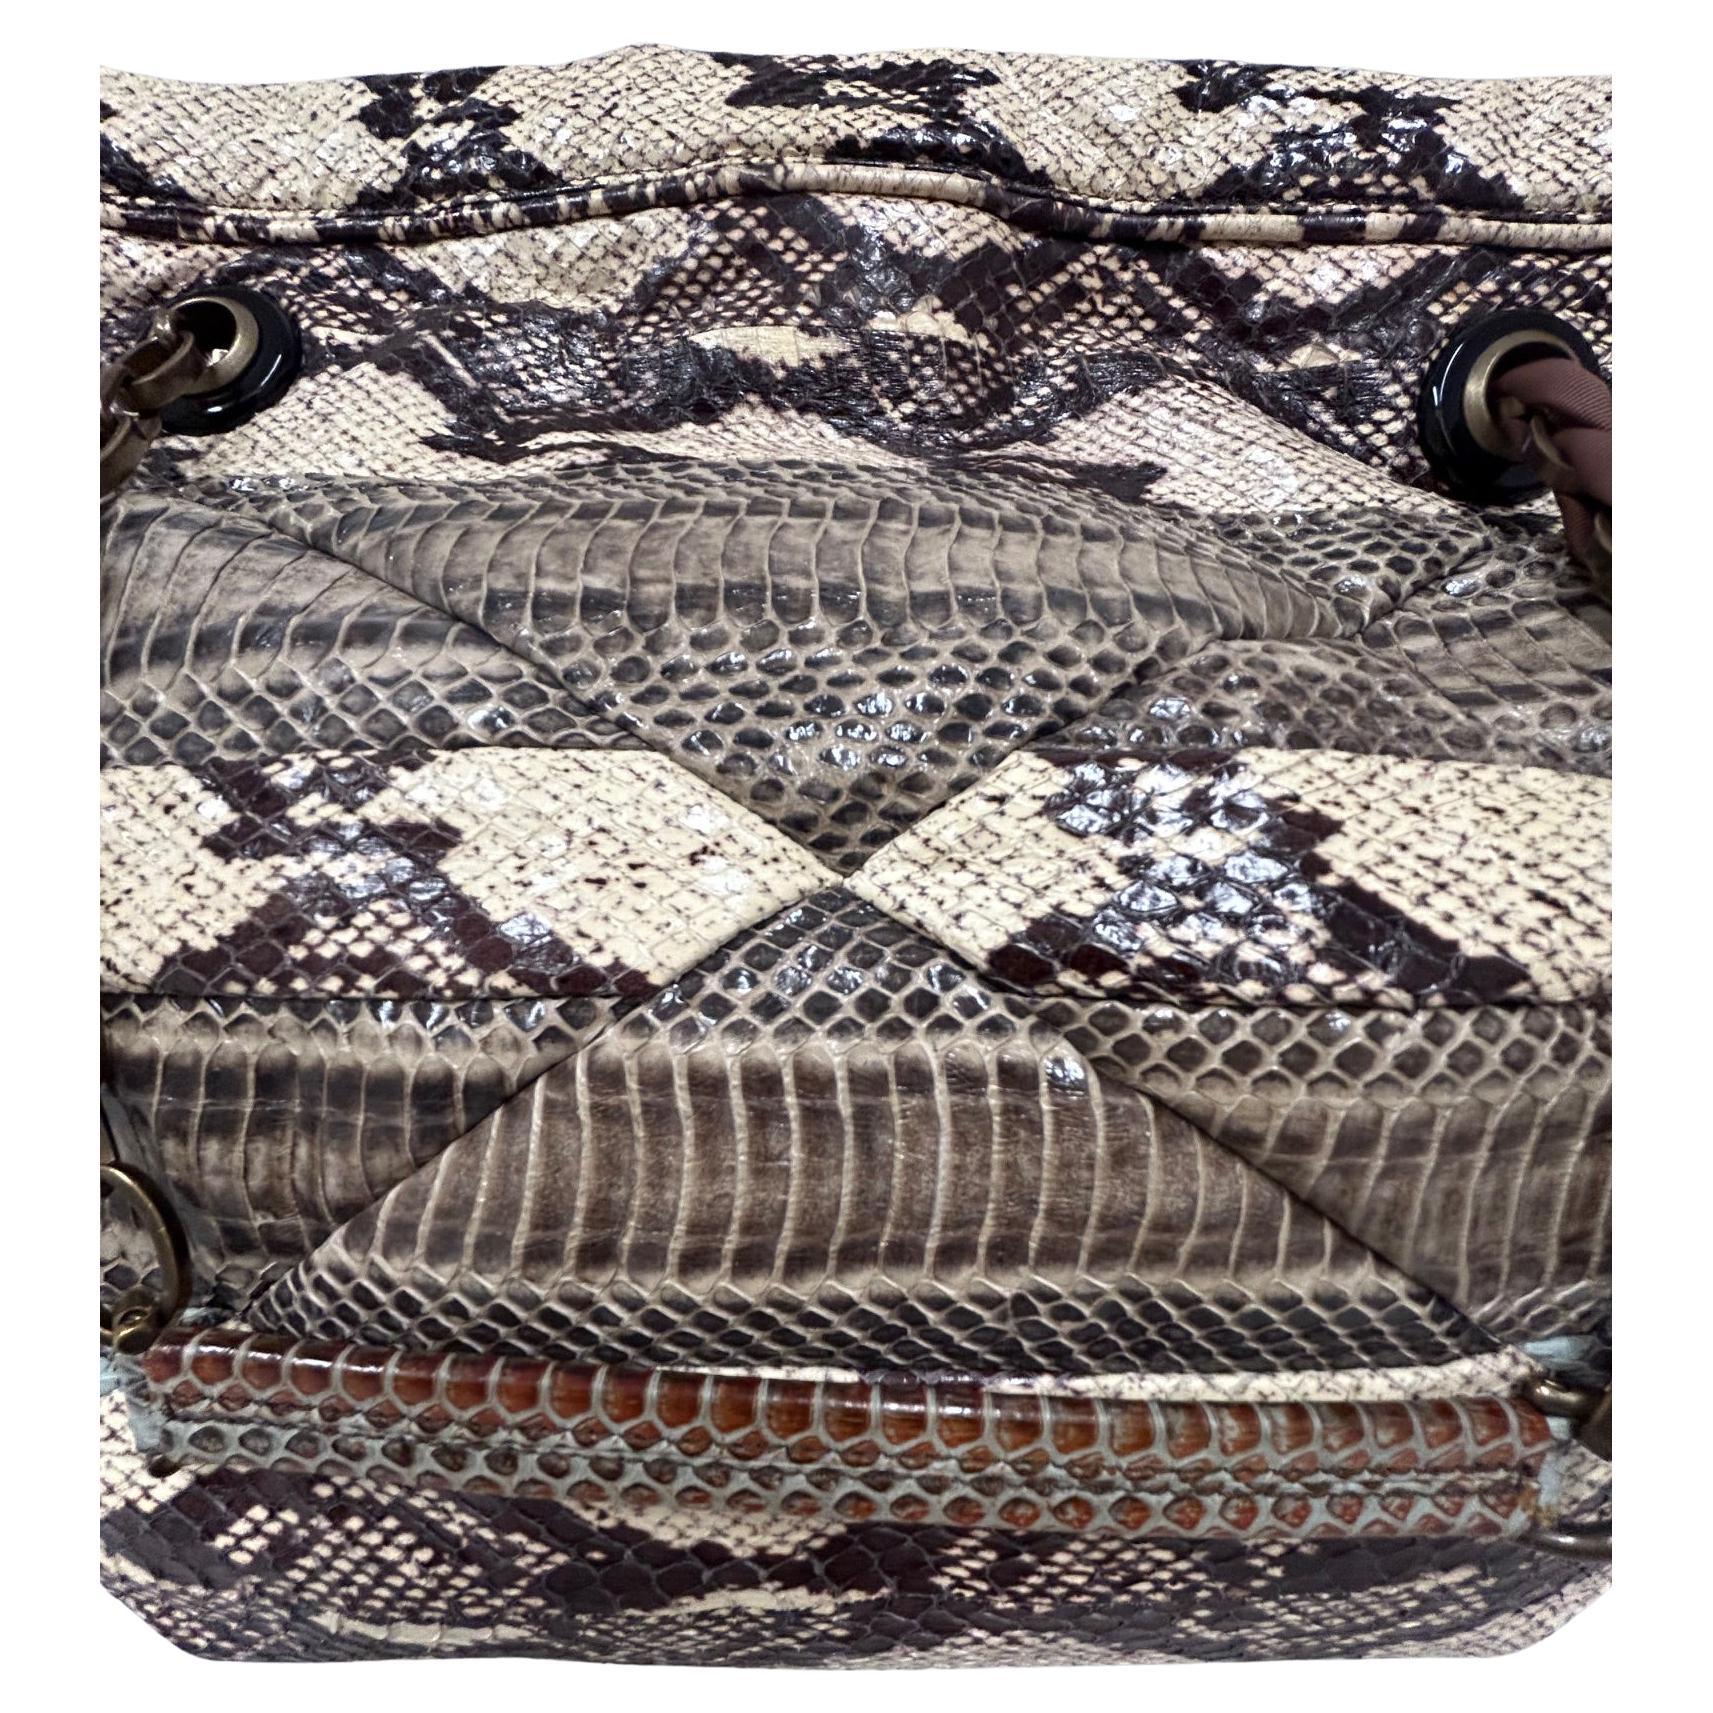 Lanvin Cold Water Snakeskin Shoulder Bag In New Condition For Sale In Queens Village, NY